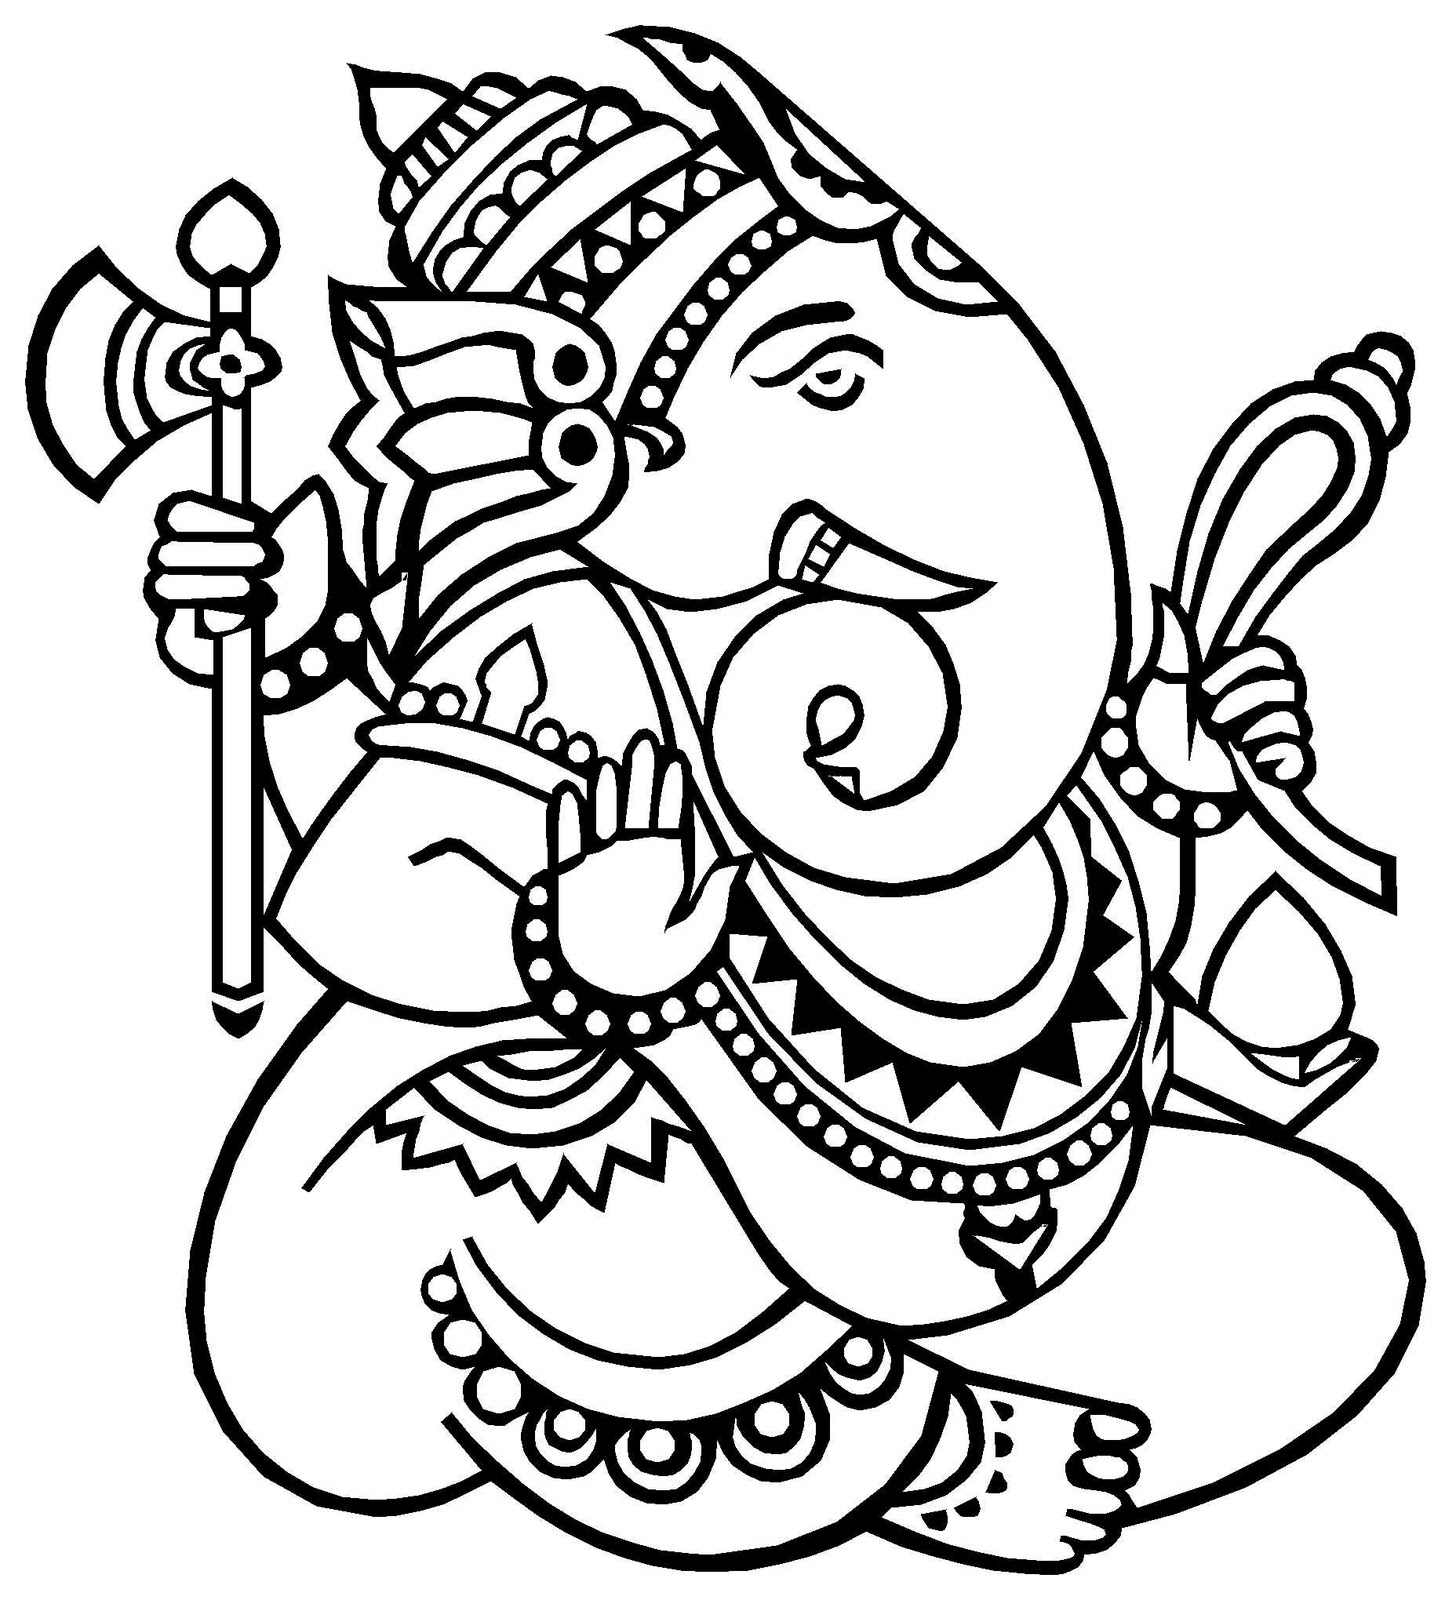 Free Ganesh Drawings Download Free Clip Art Free Clip Art On Clipart Library So, kids learn how to draw lord ganesha very easily. clipart library